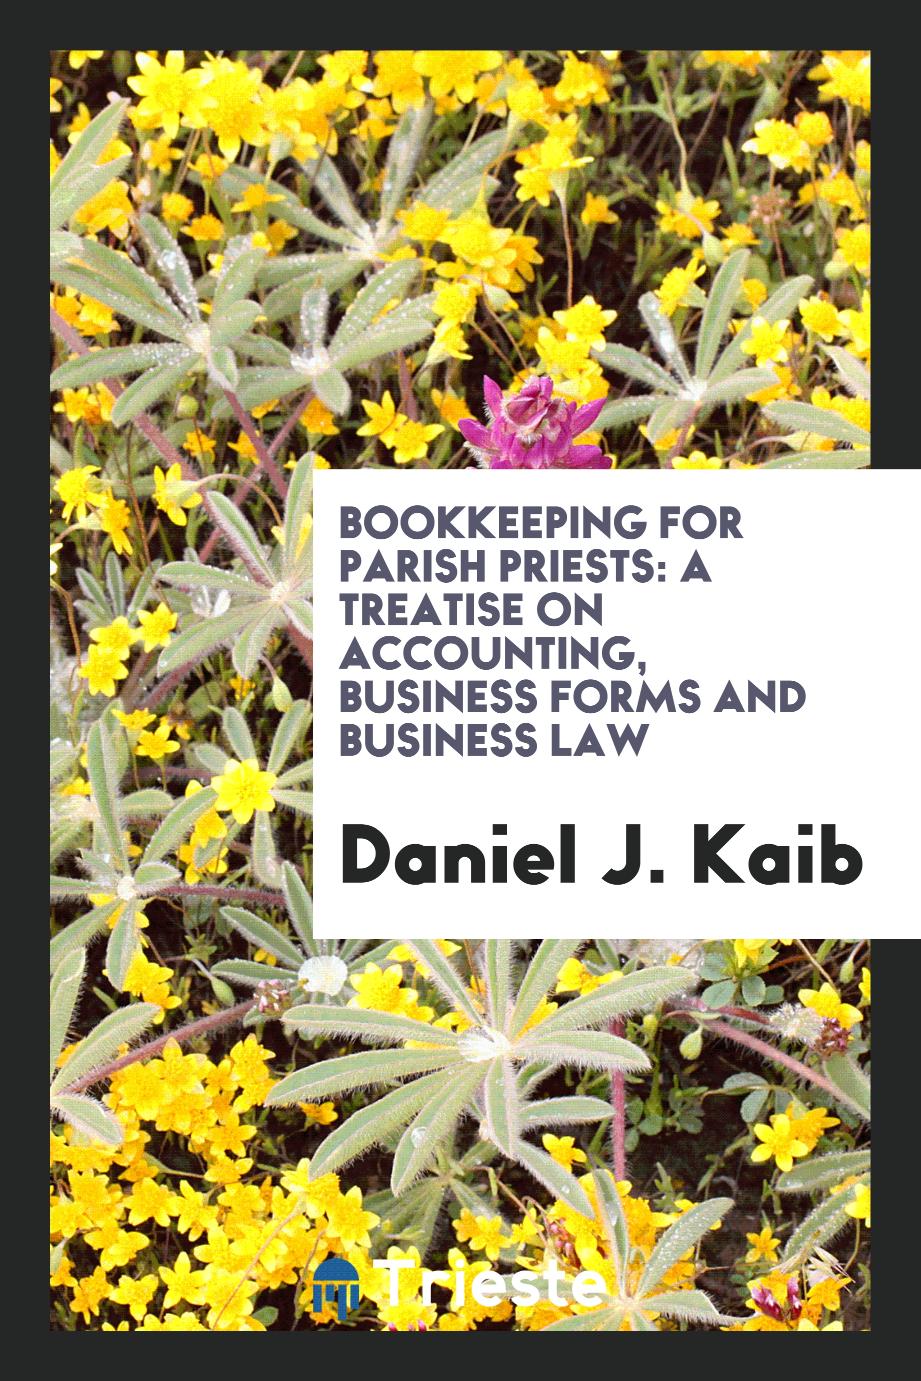 Bookkeeping for Parish Priests: A Treatise on Accounting, Business Forms and Business Law